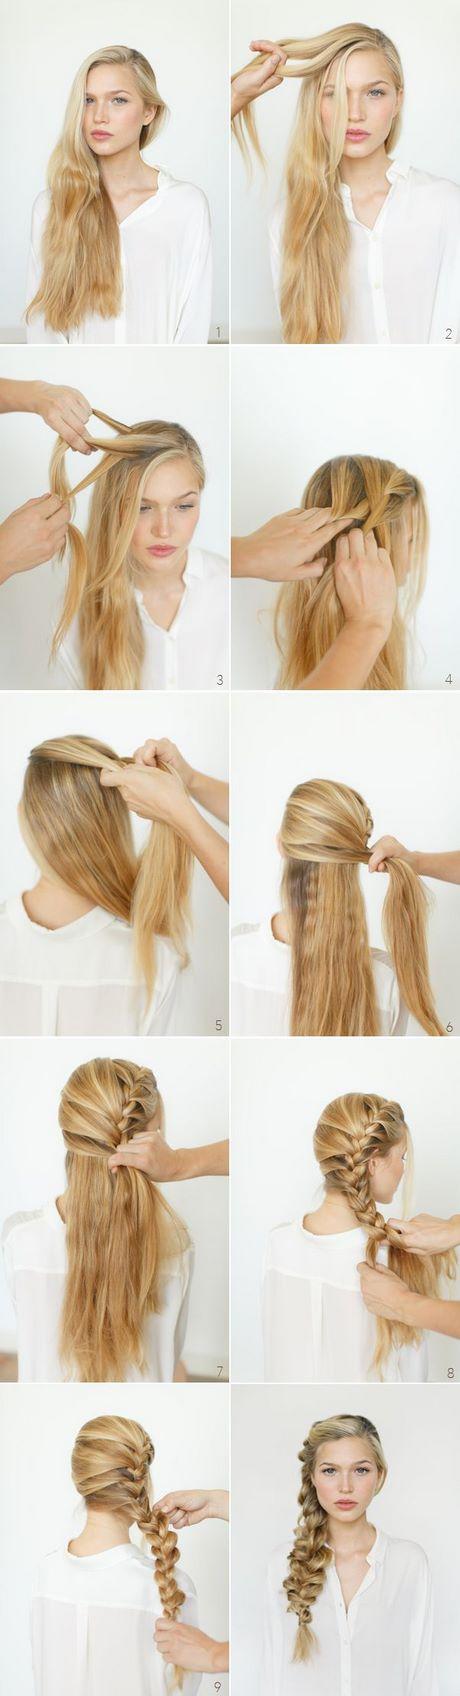 Different hair designs for long hair different-hair-designs-for-long-hair-03_15